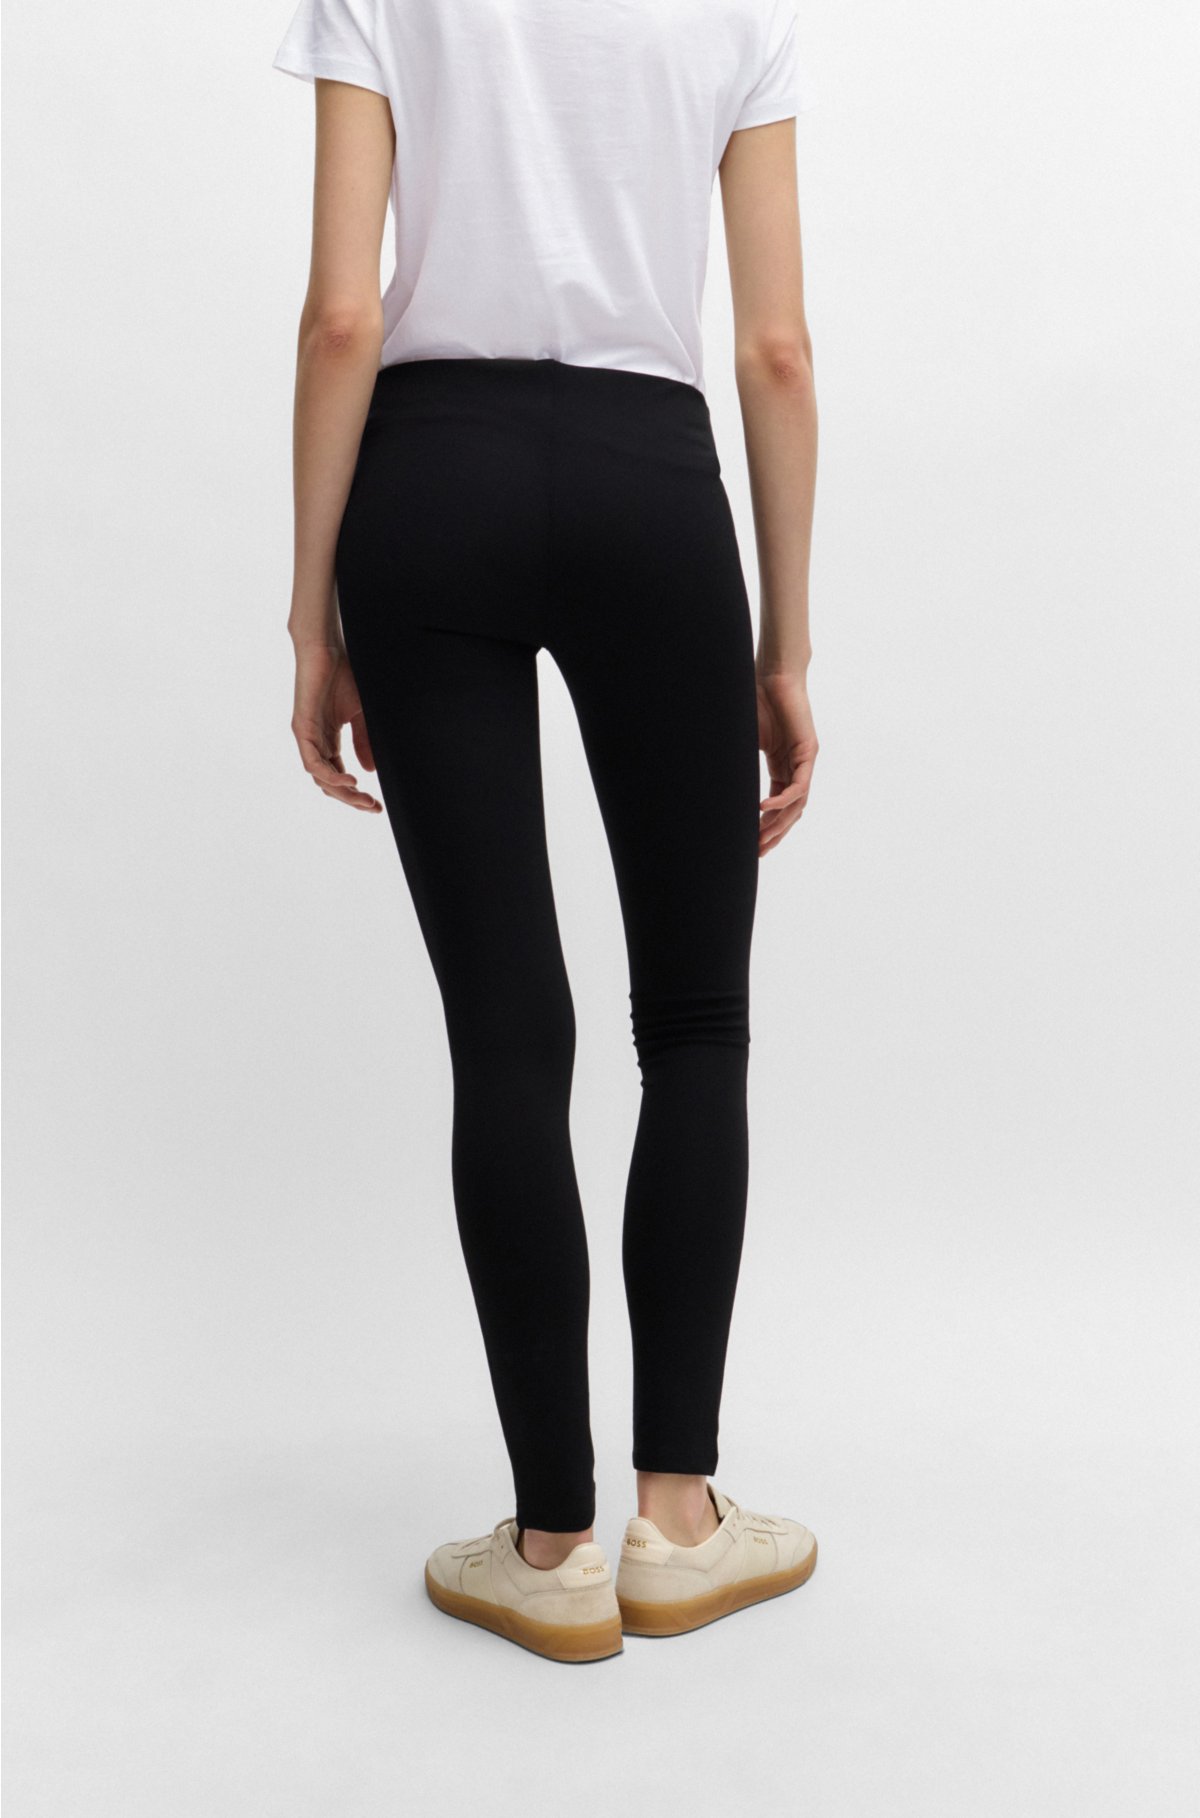 Extra-slim-fit leggings in power-stretch jersey, Black